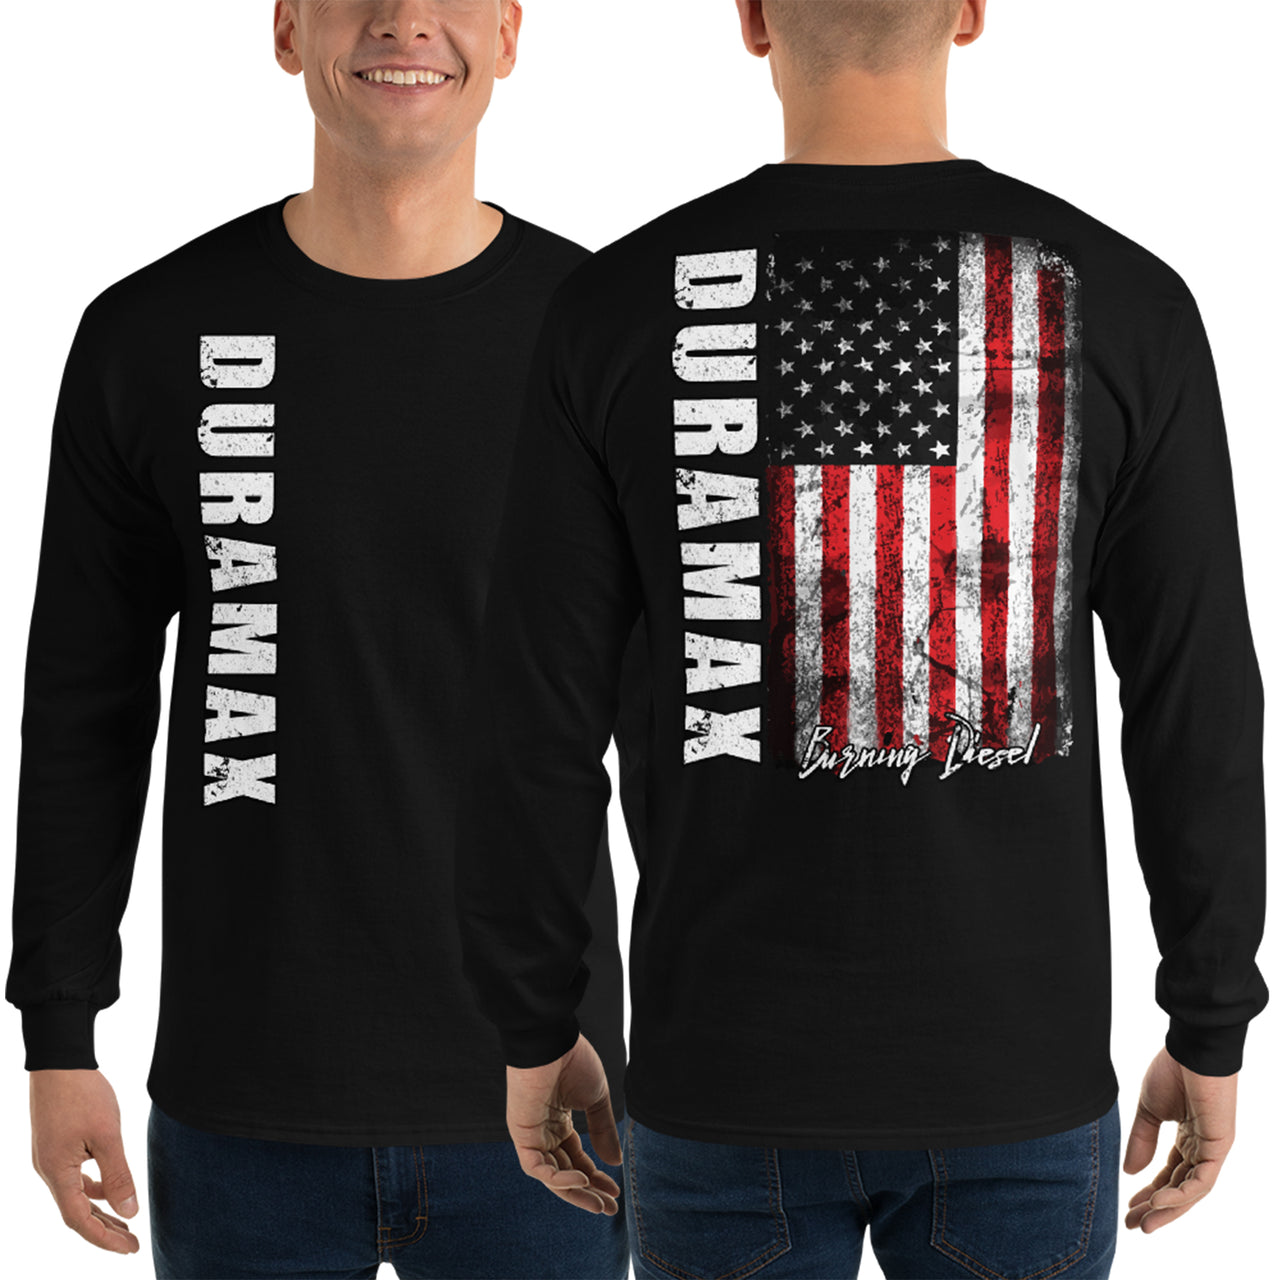 Duramax Shirt With American Flag Design Mens Long Sleeve T-Shirt modeled in black